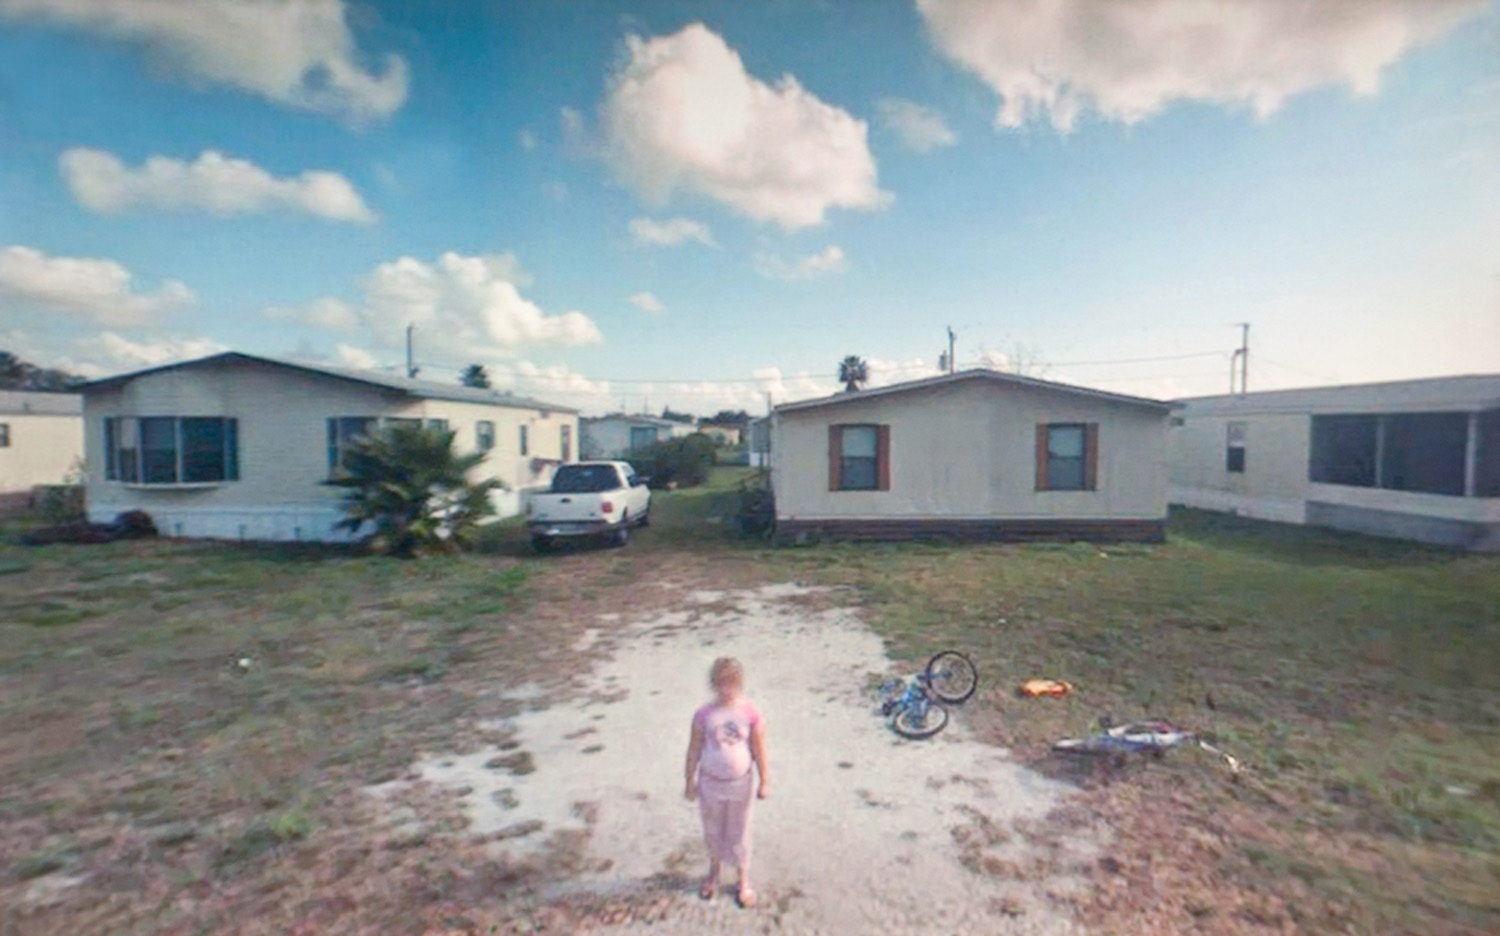 LightBox spoke with 12 artists who have been inspired by Google Maps in their work. Here, they describe how they have used this technology as part of their creative process. 
                              A New American Picture, by Doug Rickard
                              #27.144277, Okeechobee, FL. (2008), 2011
                              
                               The pictures that I chose don’t really have a strong feeling of spying; the pixilation and the broken elements actually emphasize the subtext and the emotion that I wanted to impart, which was America in a devastated form, almost the inverse of the American dream. The aesthetic that I used heightens that sense.